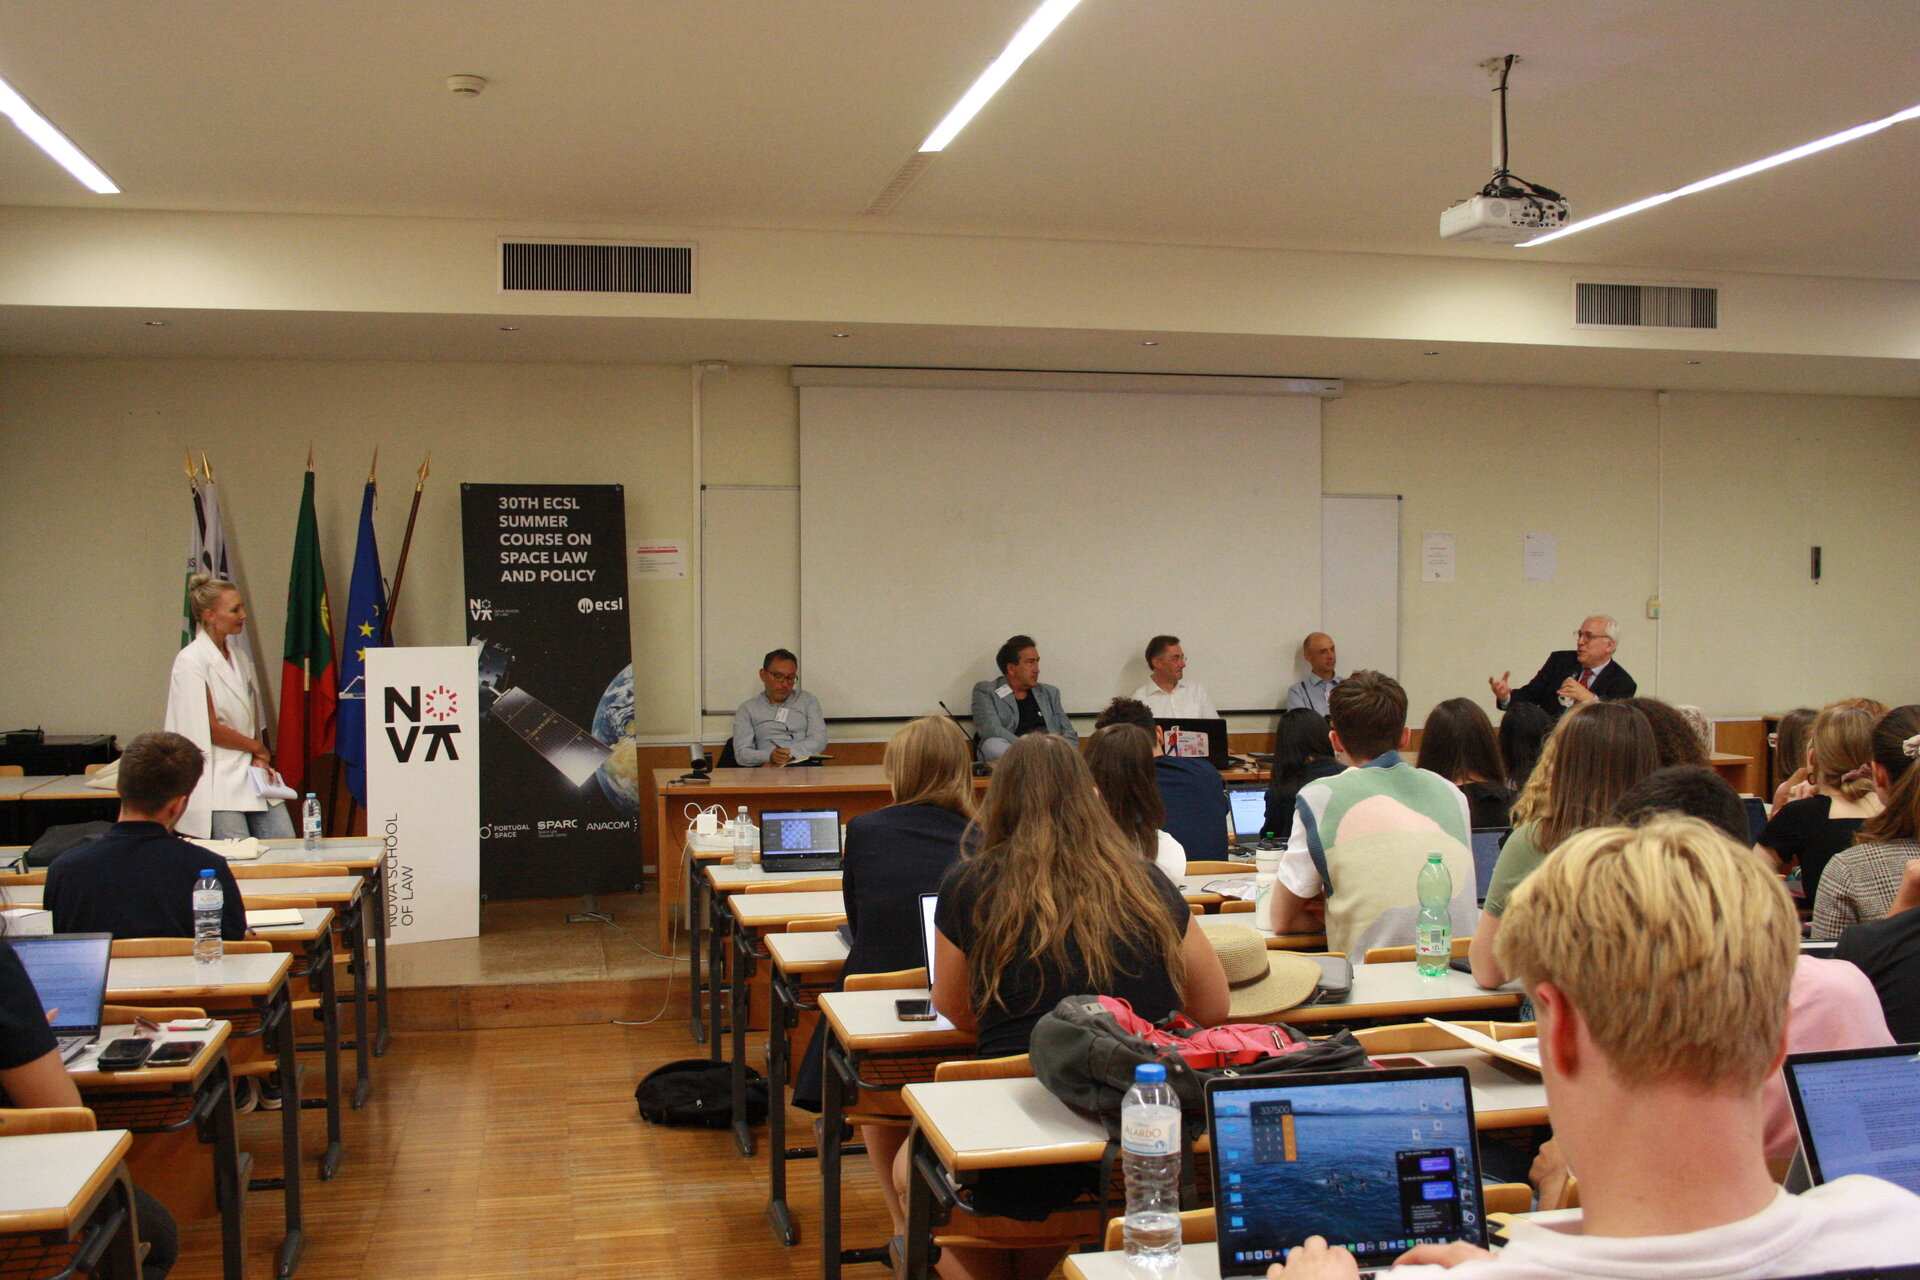 ECSL Summer Course - Panel discussion